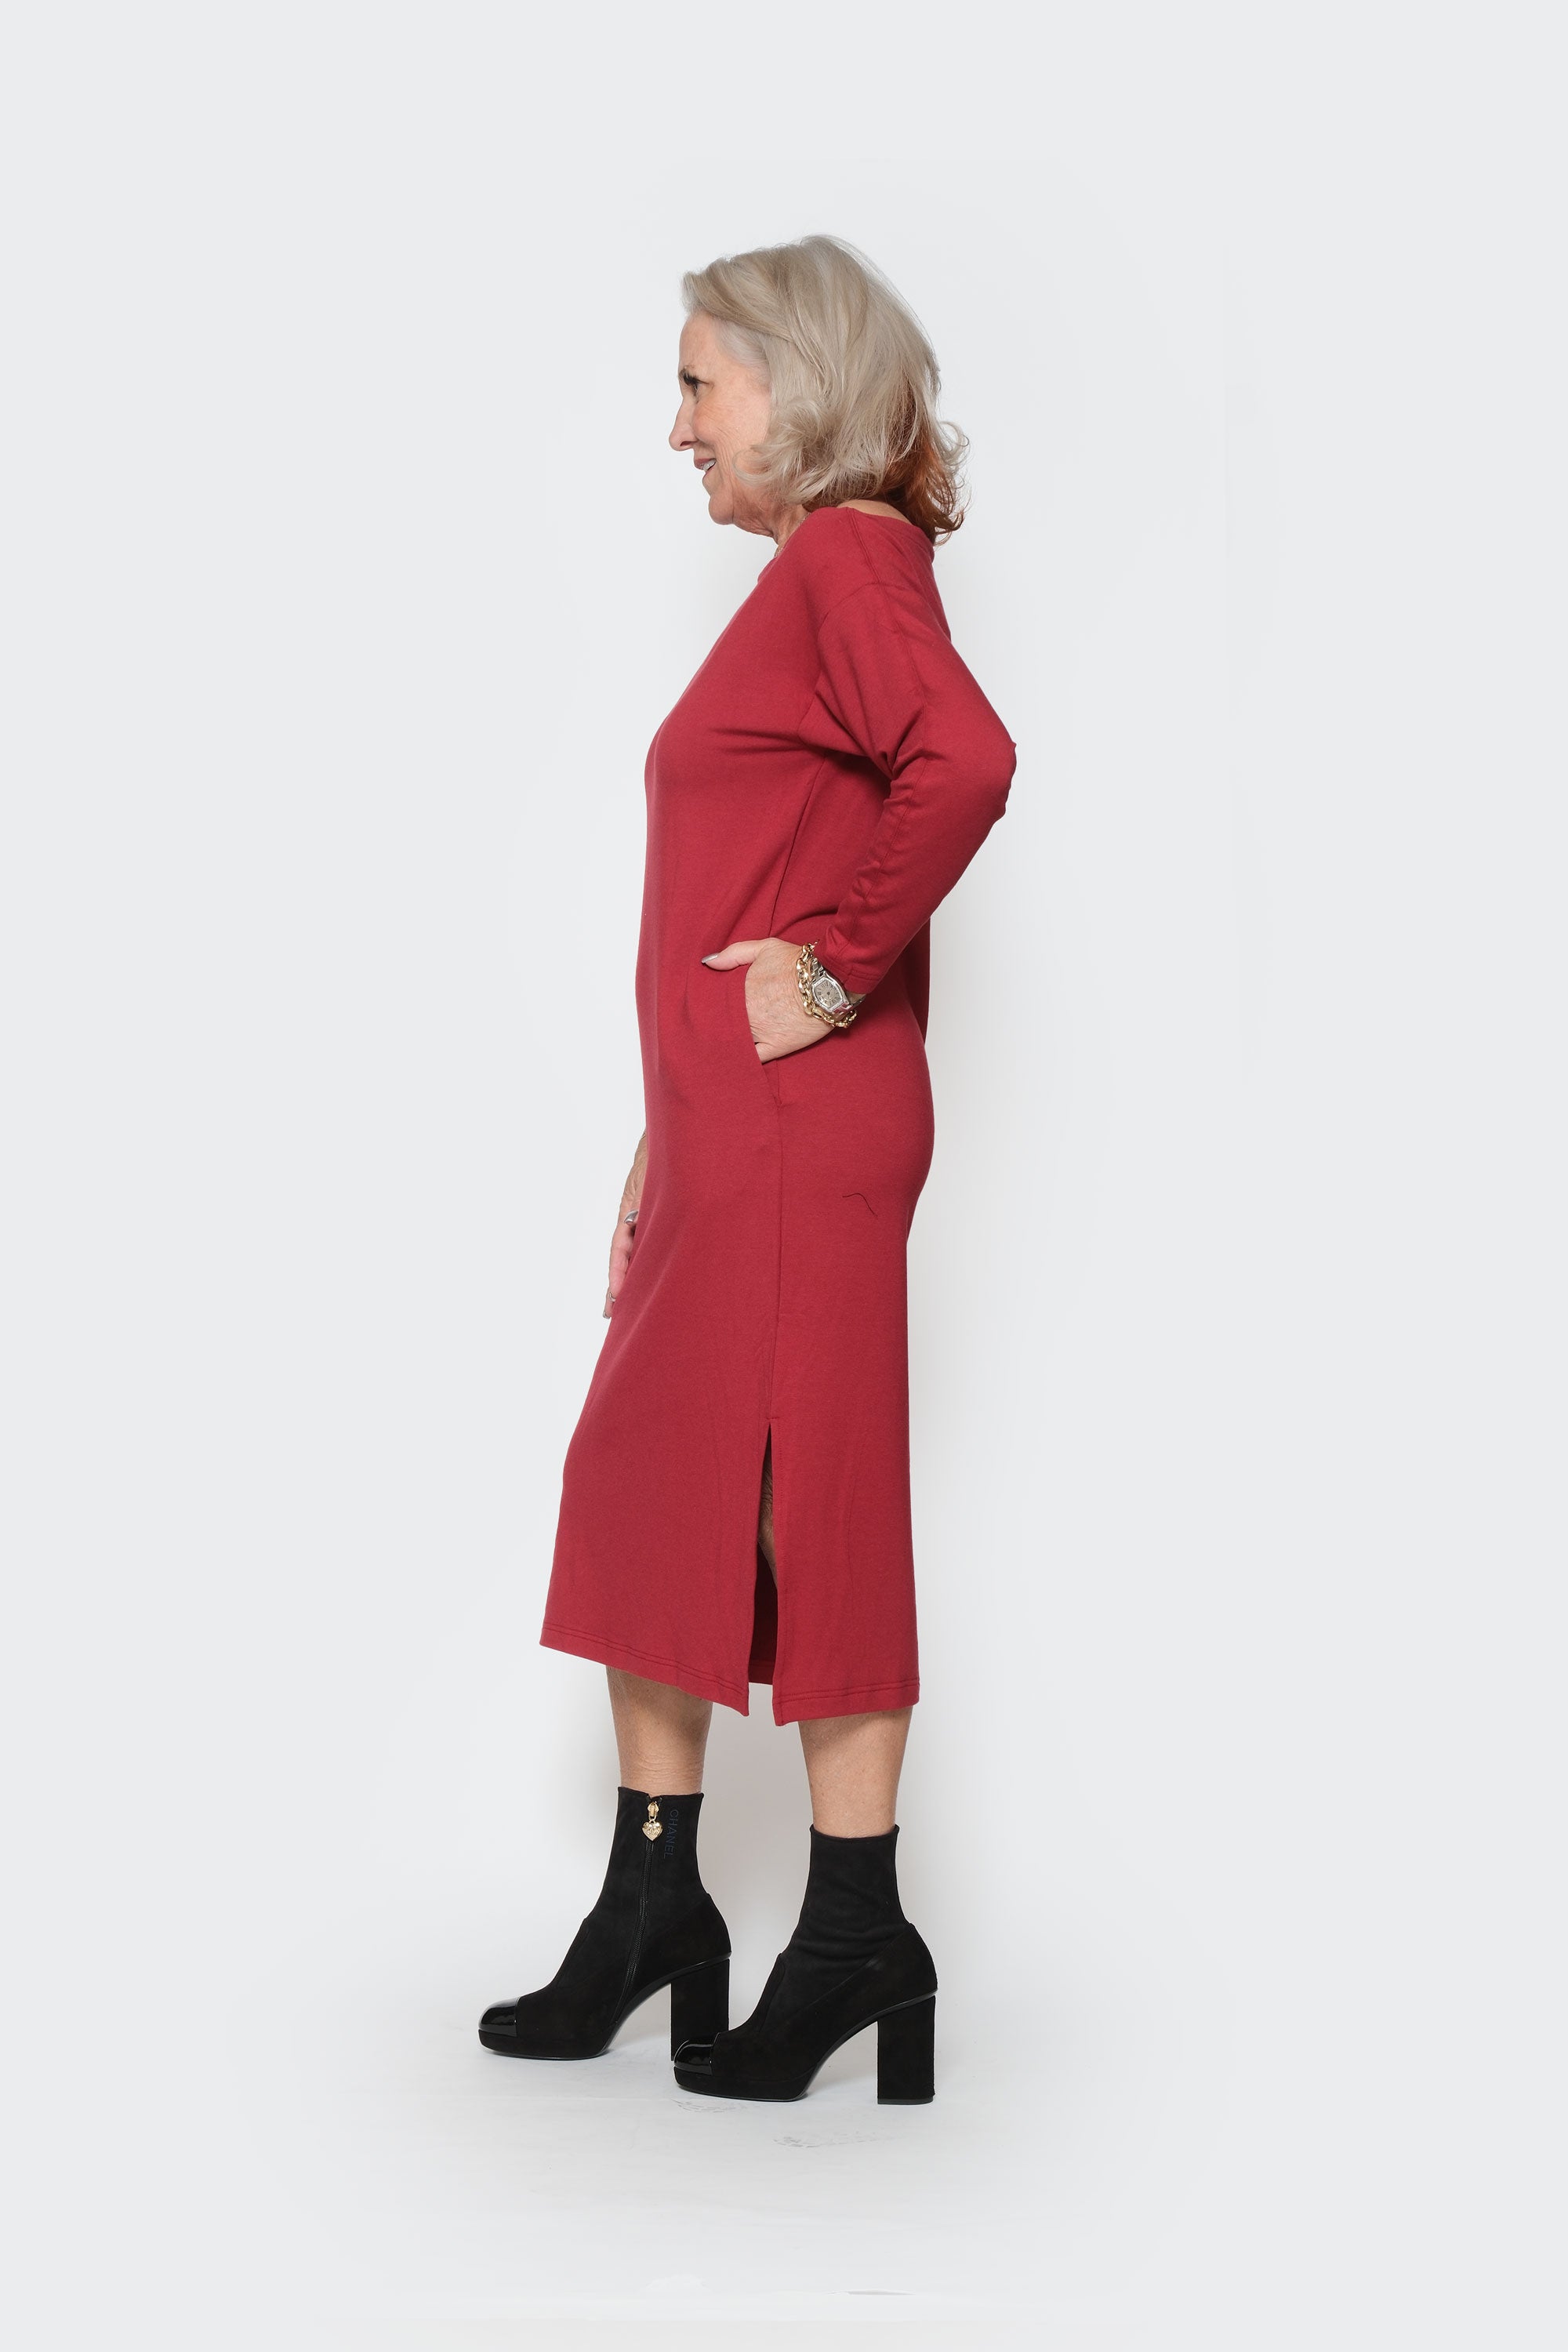 All Day Midi Dress in Scarlet Red